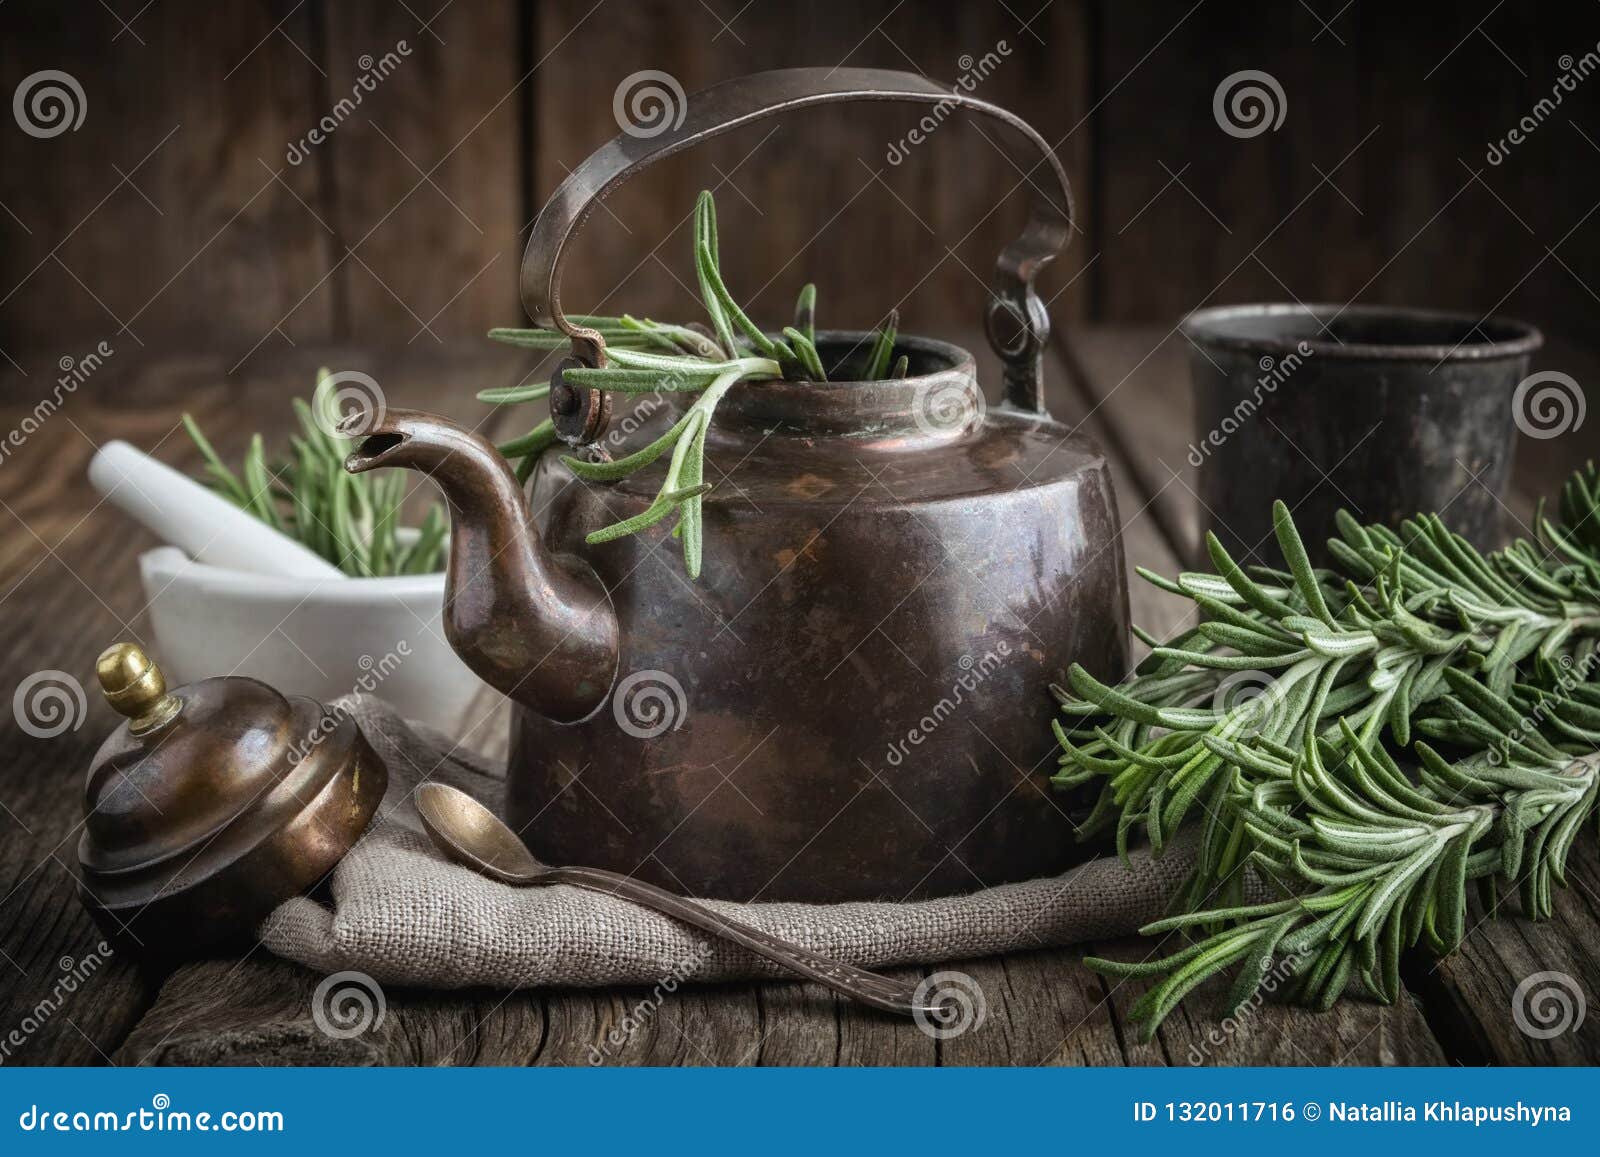 vintage retro teapot, bunch of fresh rosemary herbs, cup of healthy herbal tea and mortar.